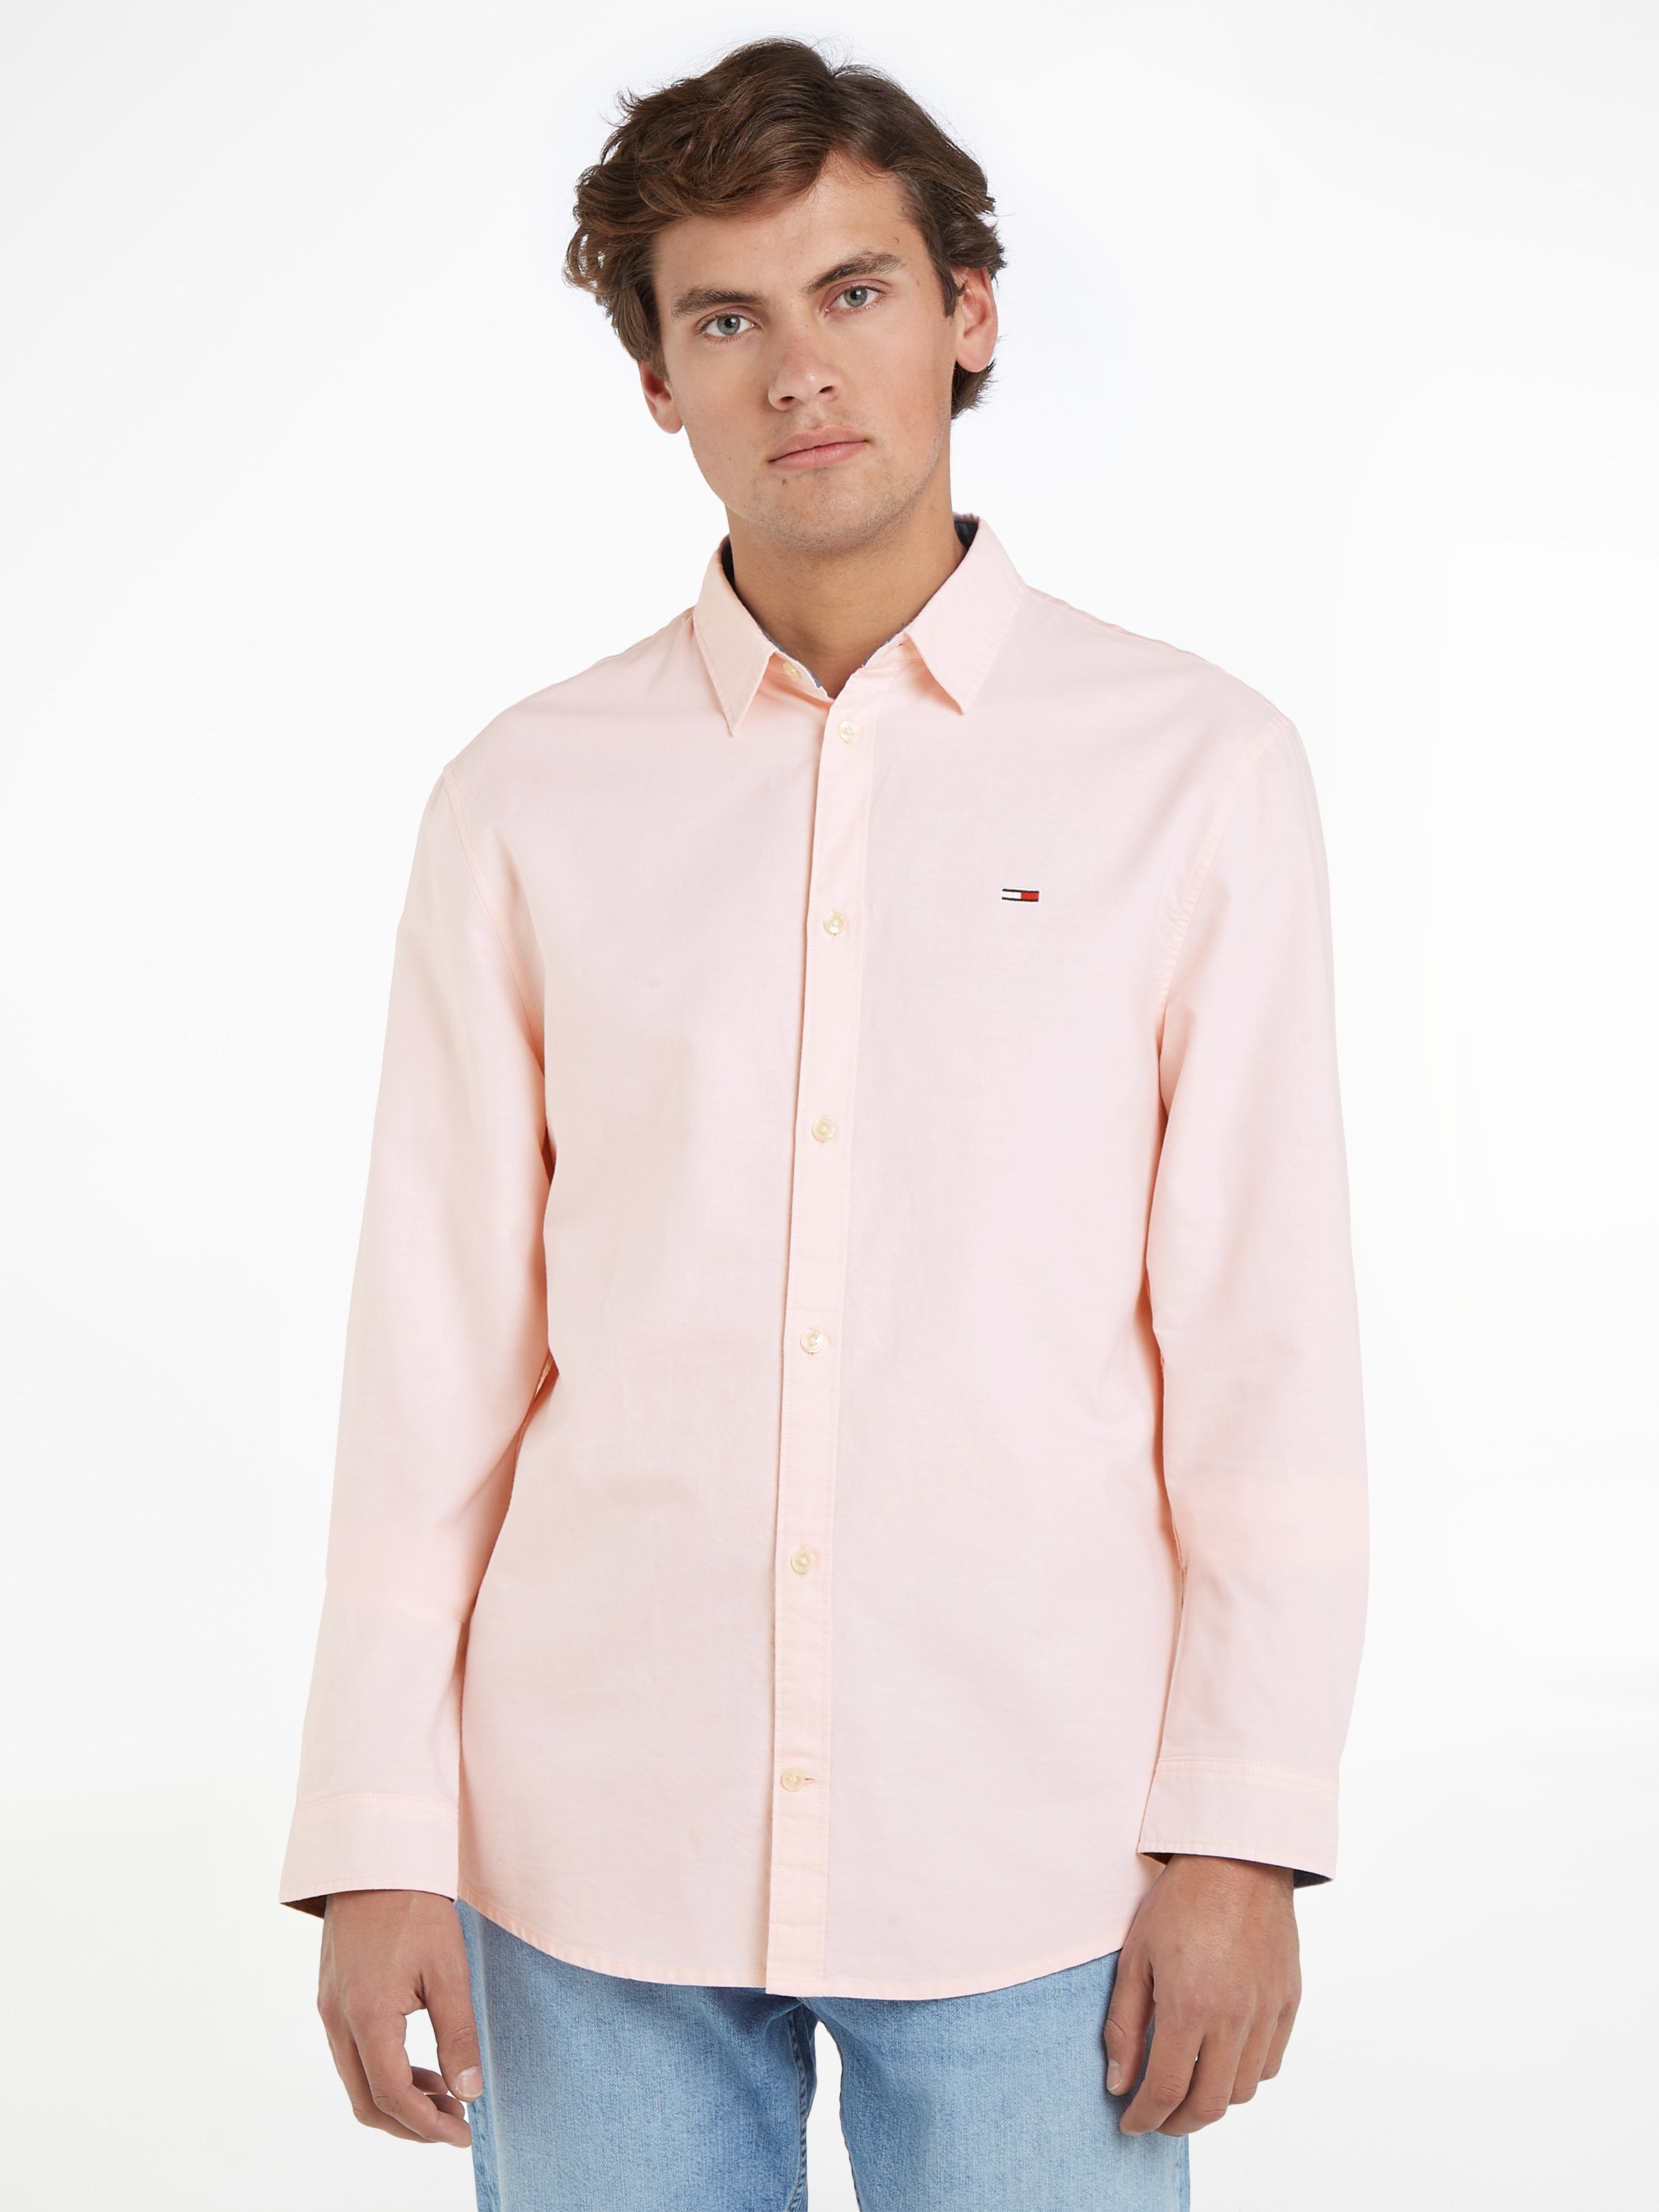 Tommy Jeans Langarmhemd »TJM CLASSIC bei SHIRT« online OTTO shoppen OXFORD